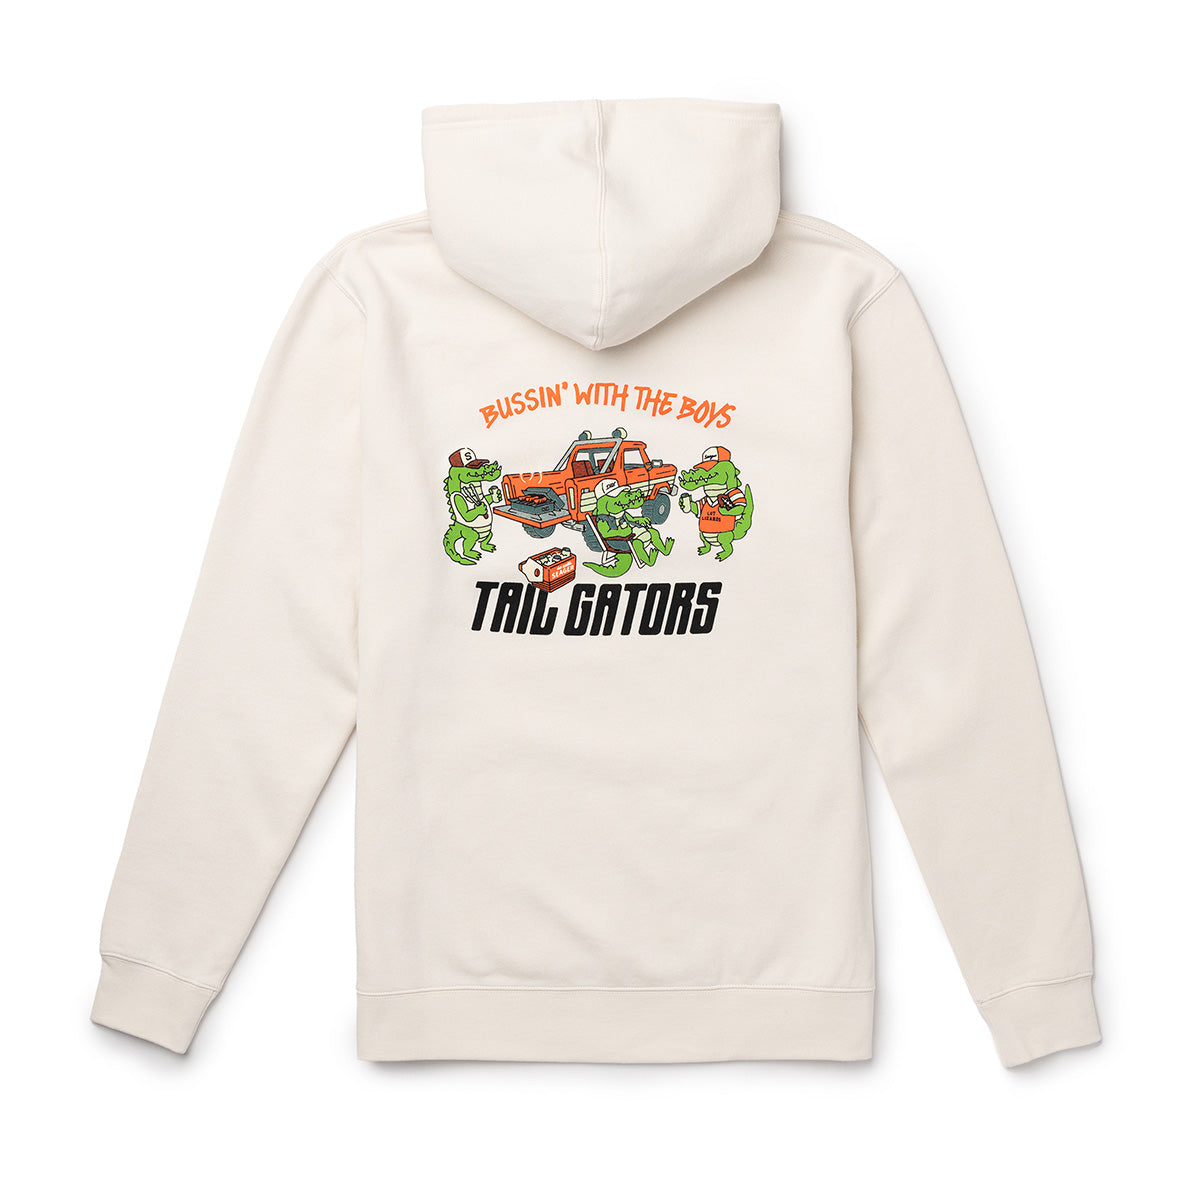 Seager x Bussin With The Boys Tailgators Hoodie-Hoodies-Bussin With The Boys-Barstool Sports